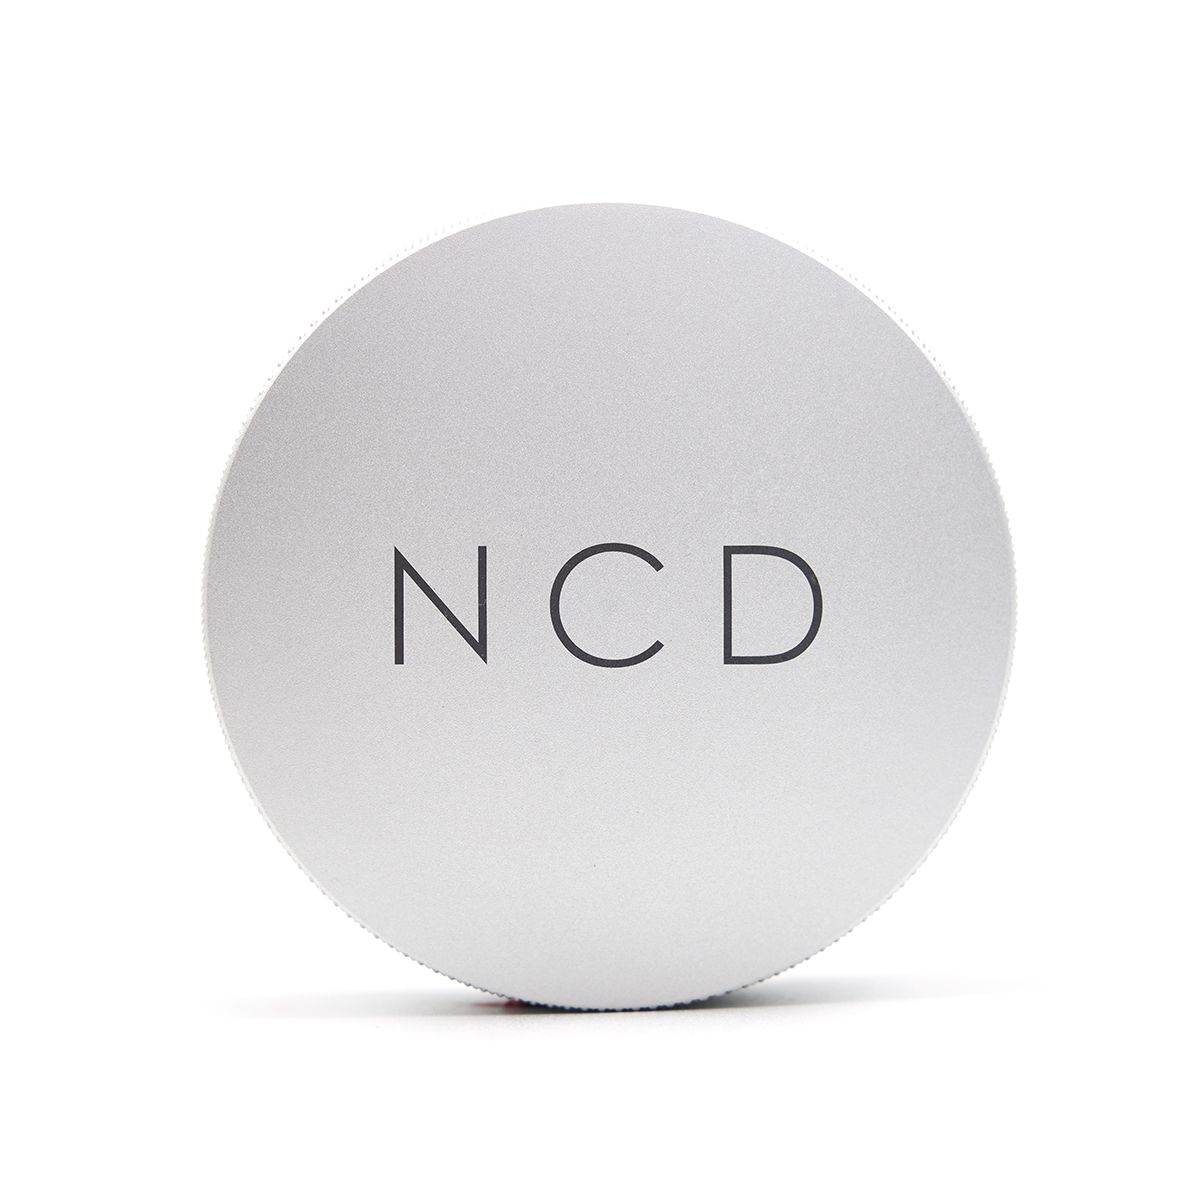 Nucleus Distribution Tool NCD in silver